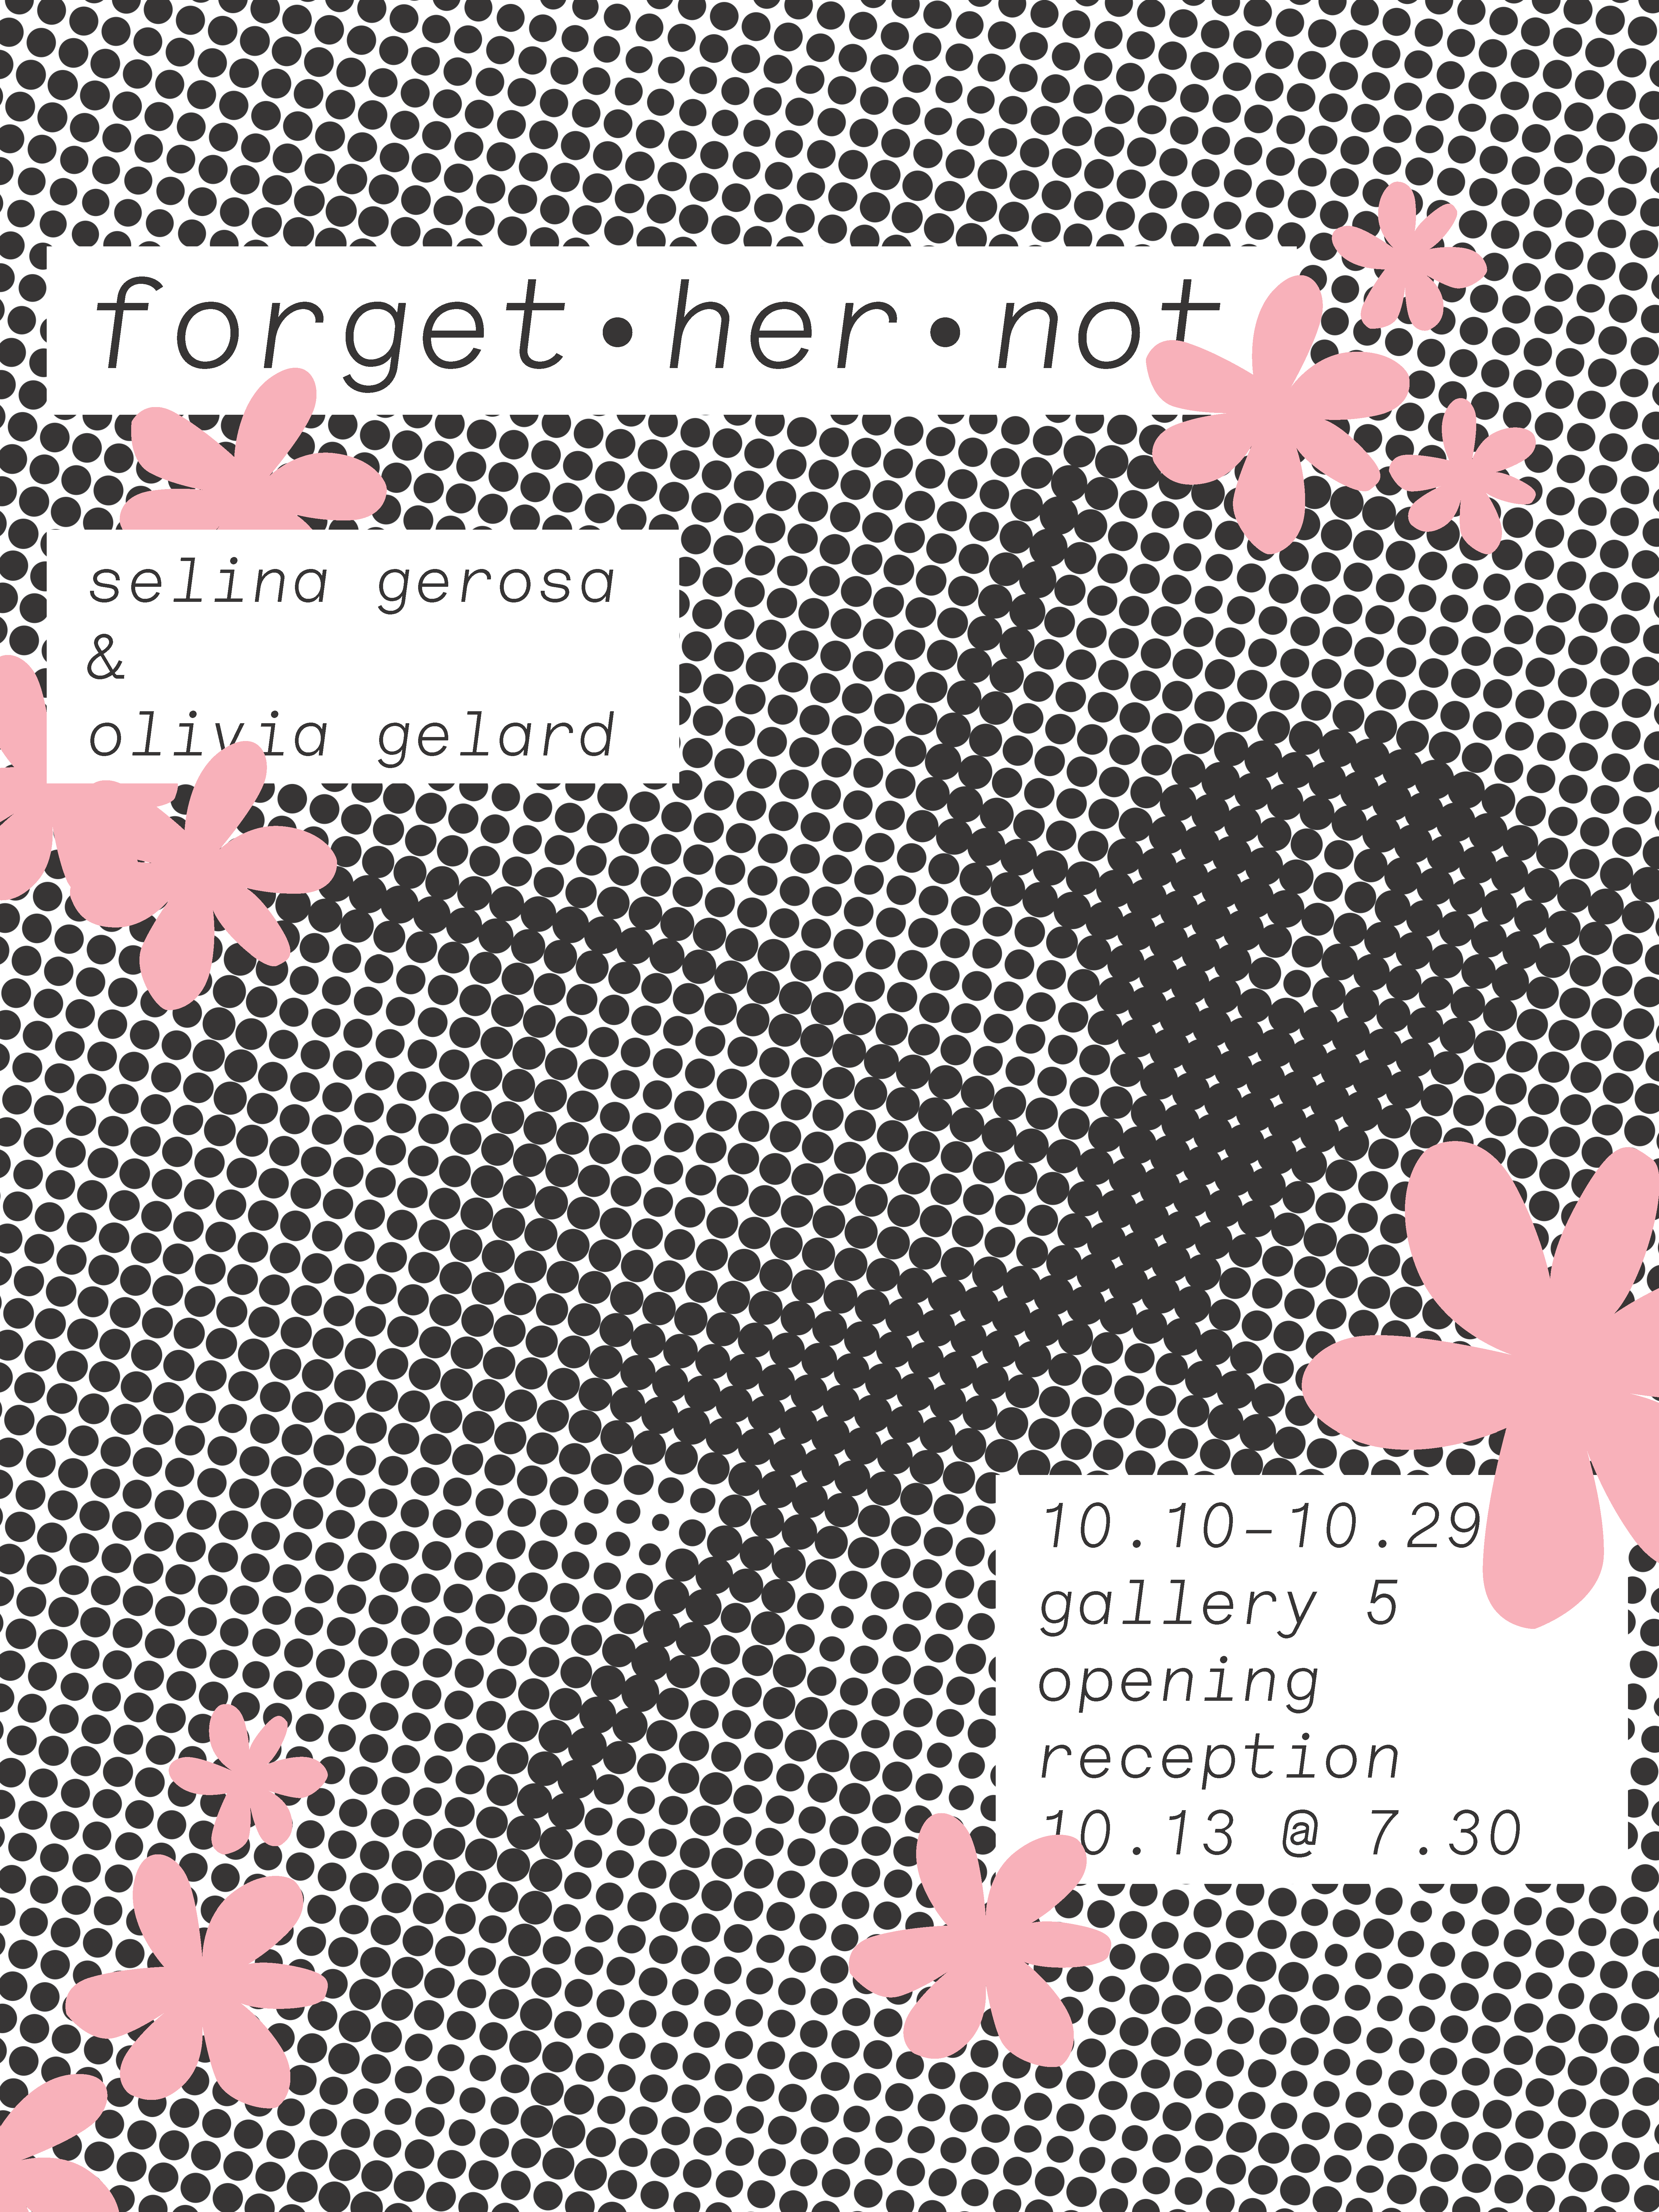 show poster with dates, spider in halftone with small pink flowers